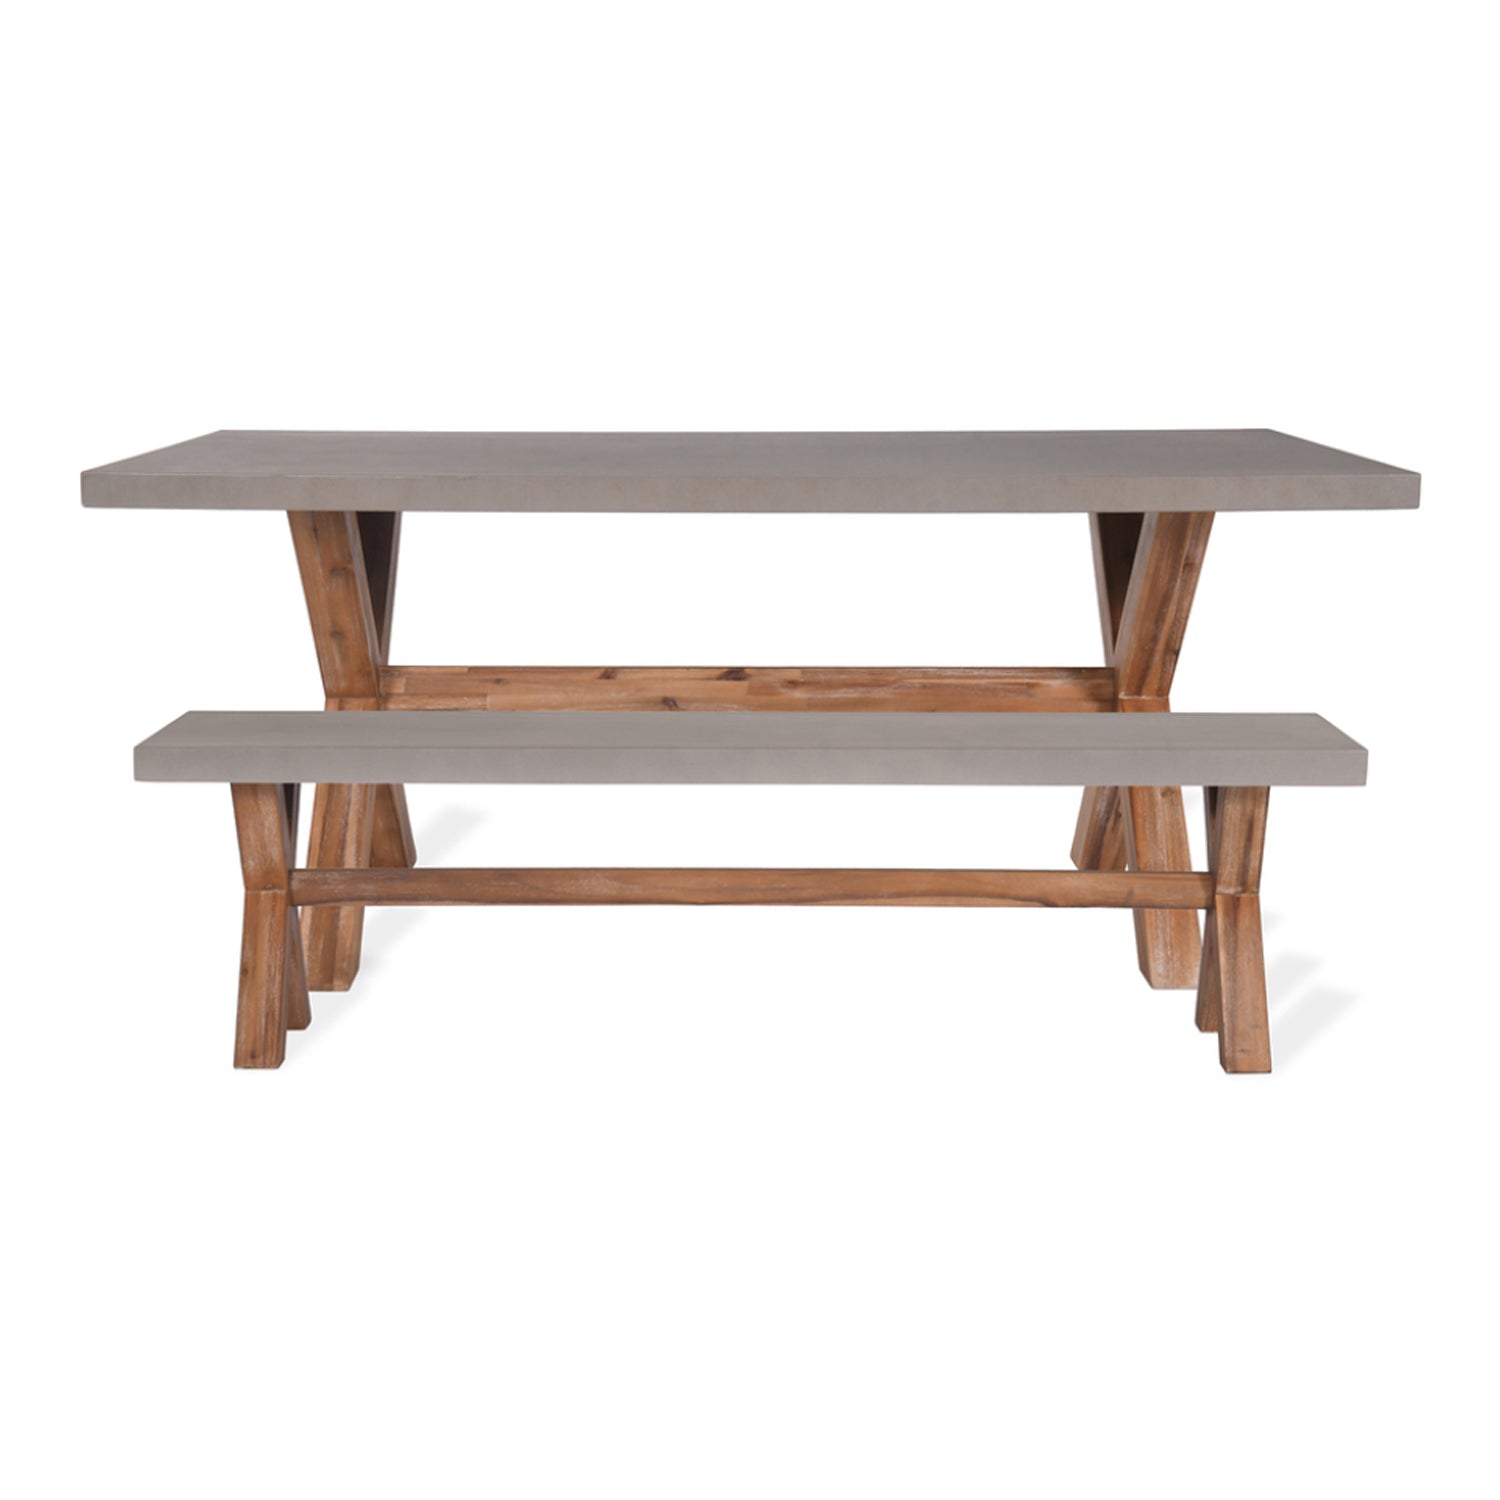 Burford Outdoor Table and Bench Set Small Natural Polystone by Garden Trading